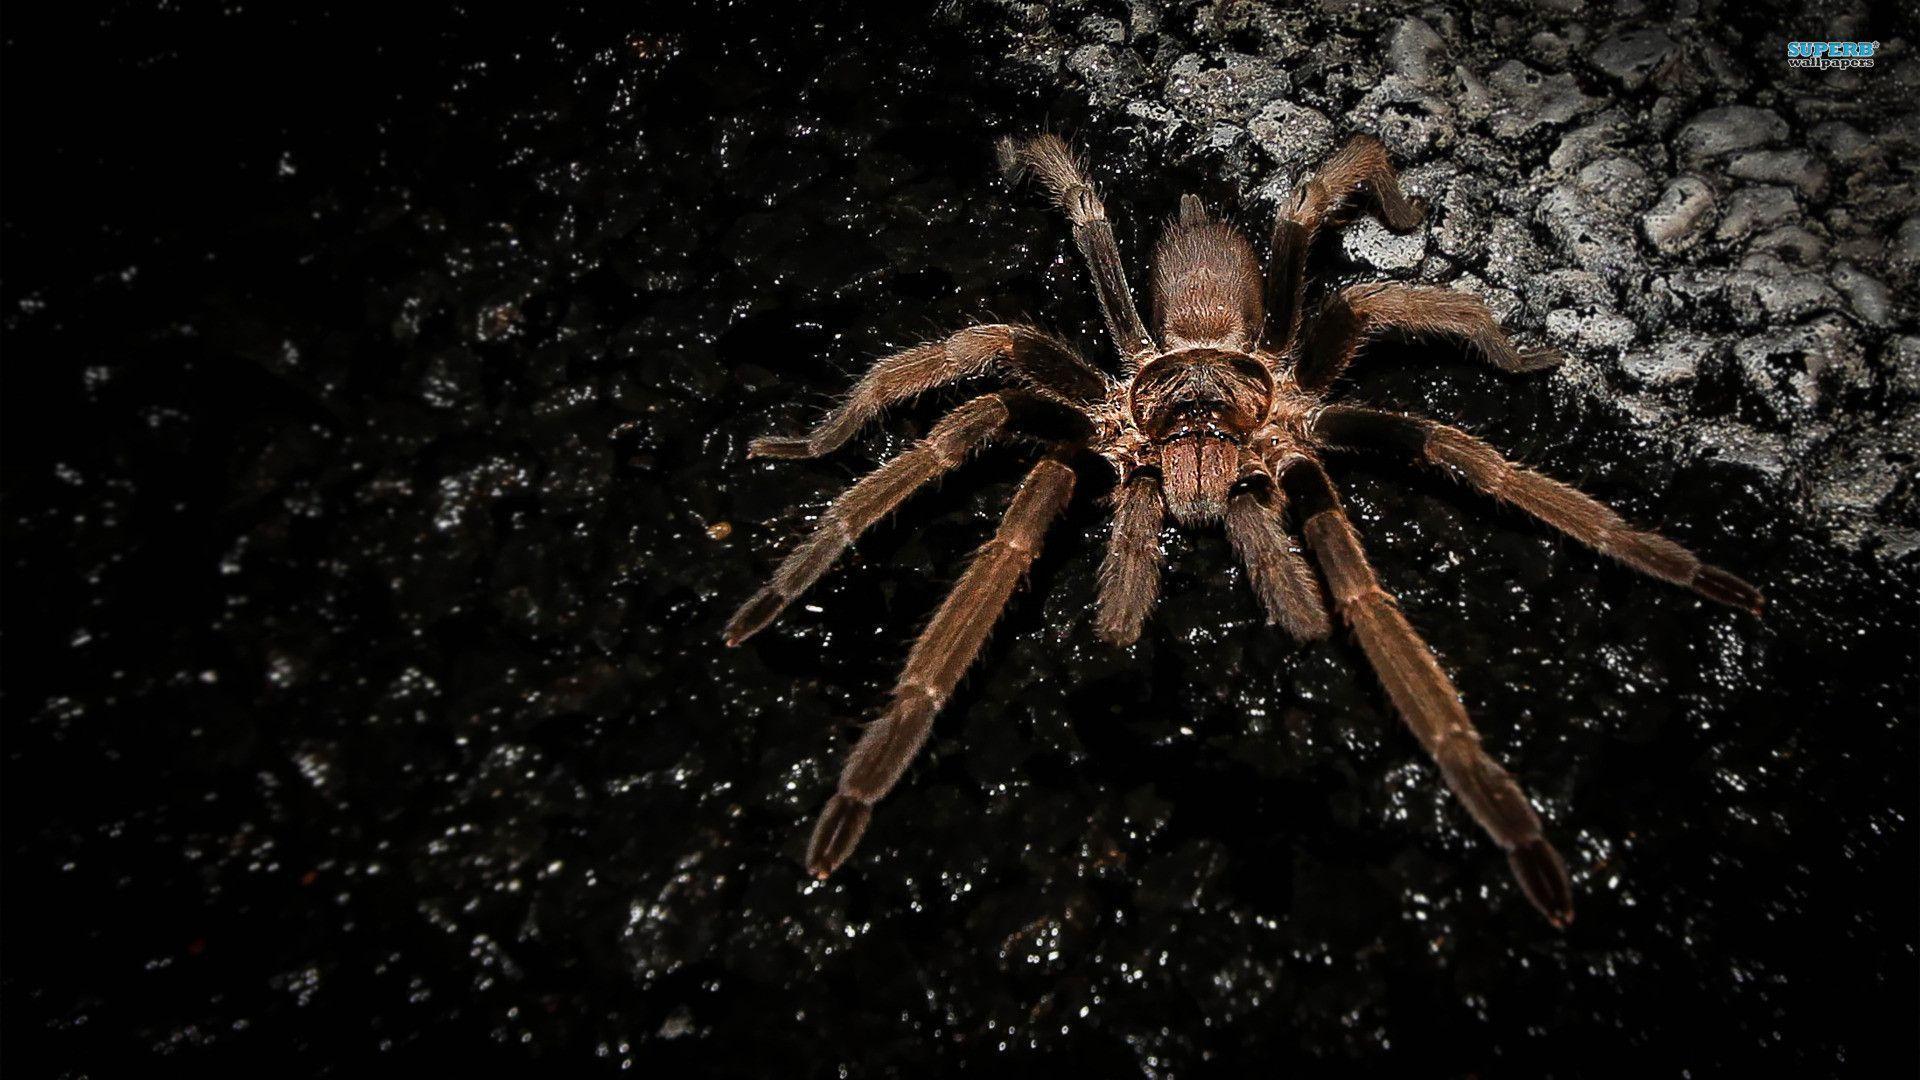 Spider 4K Ultra Hd Wallpapers, Spider, Animal